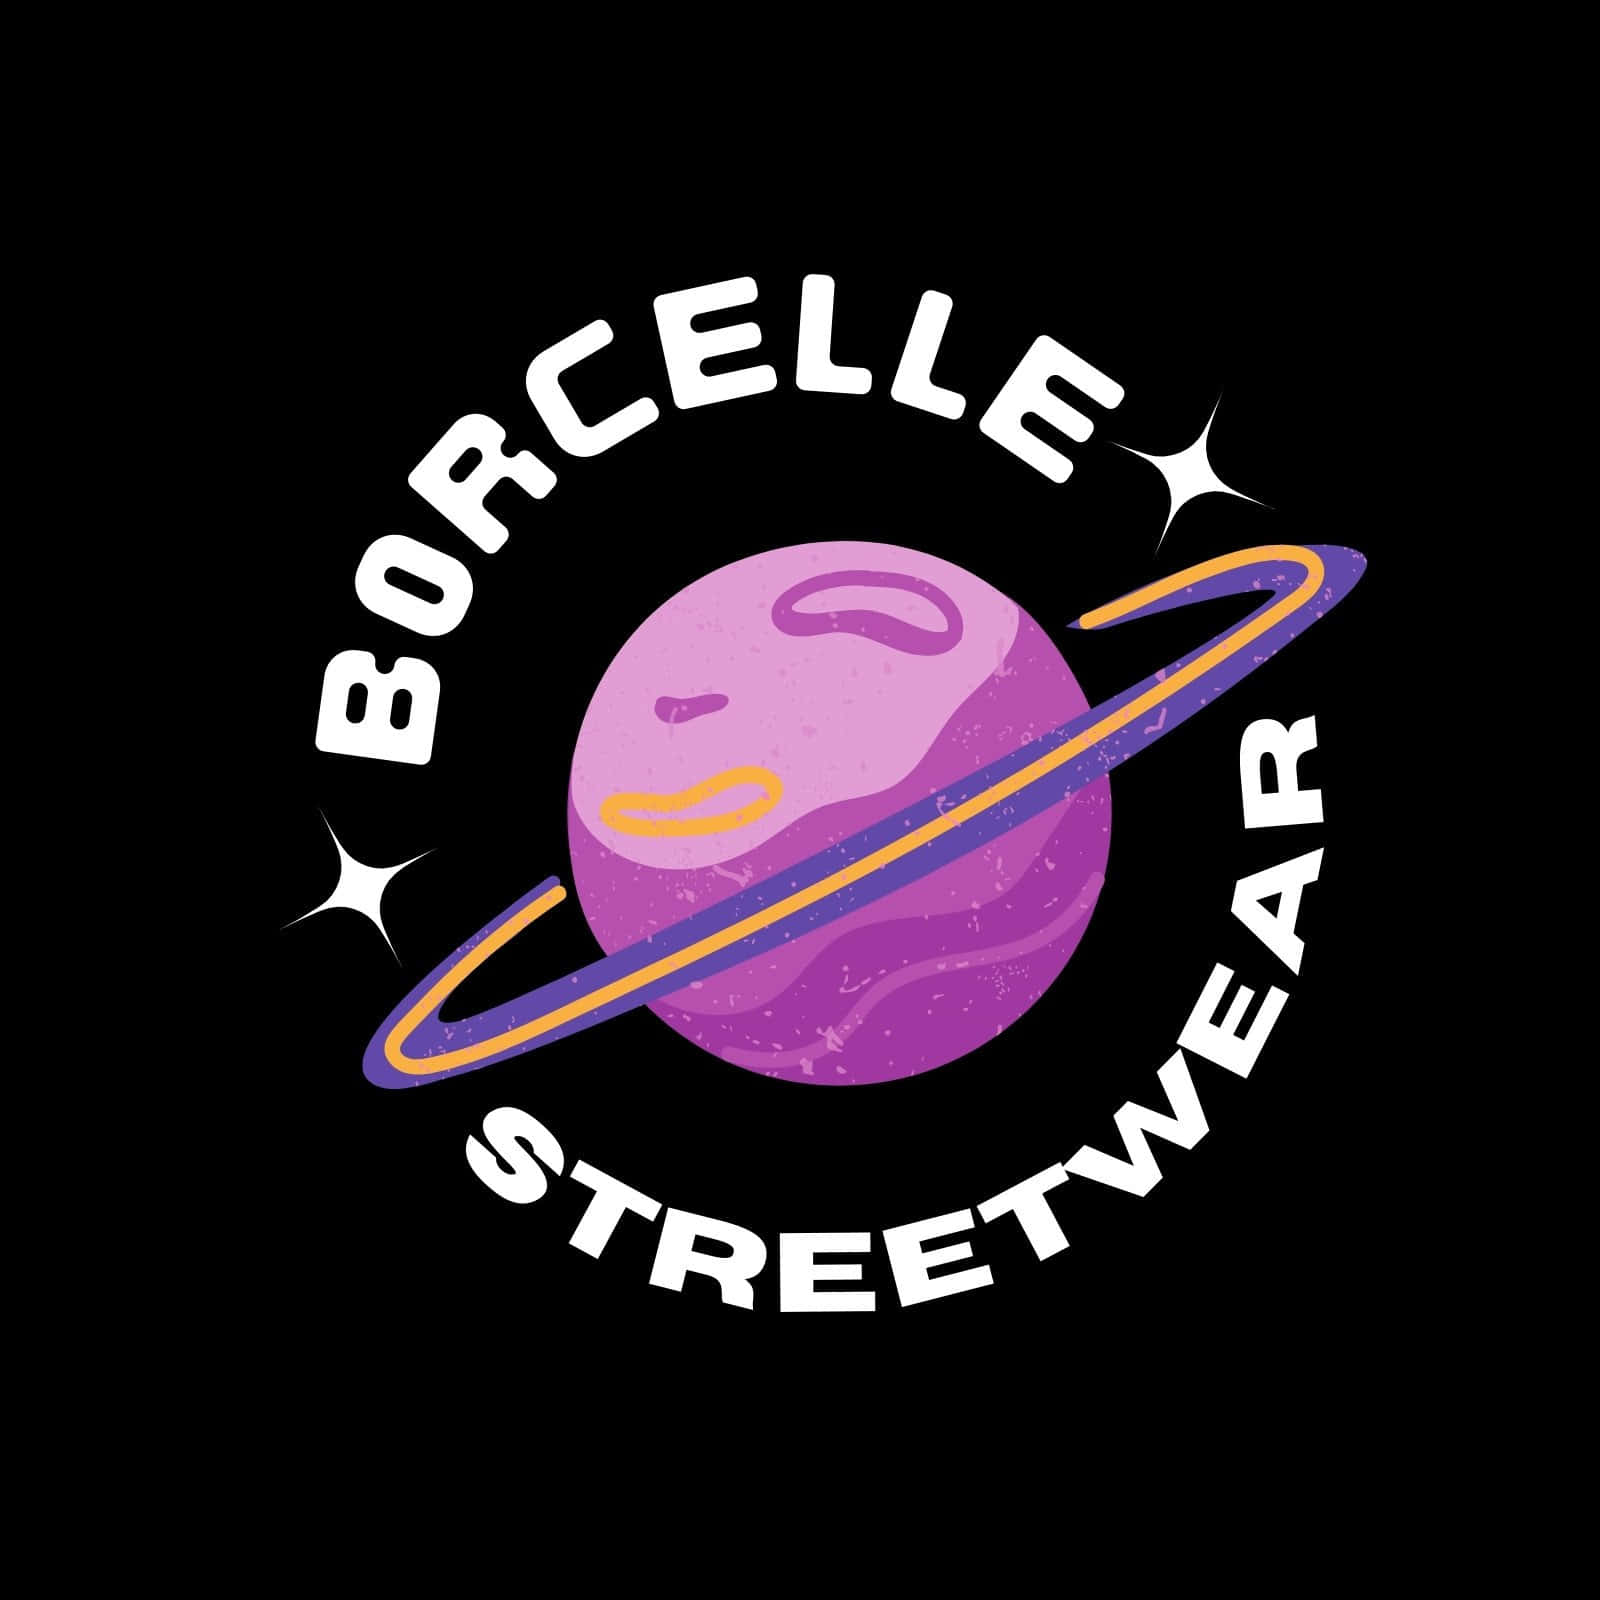 Borcelle Streetwear Logowith Planet Wallpaper